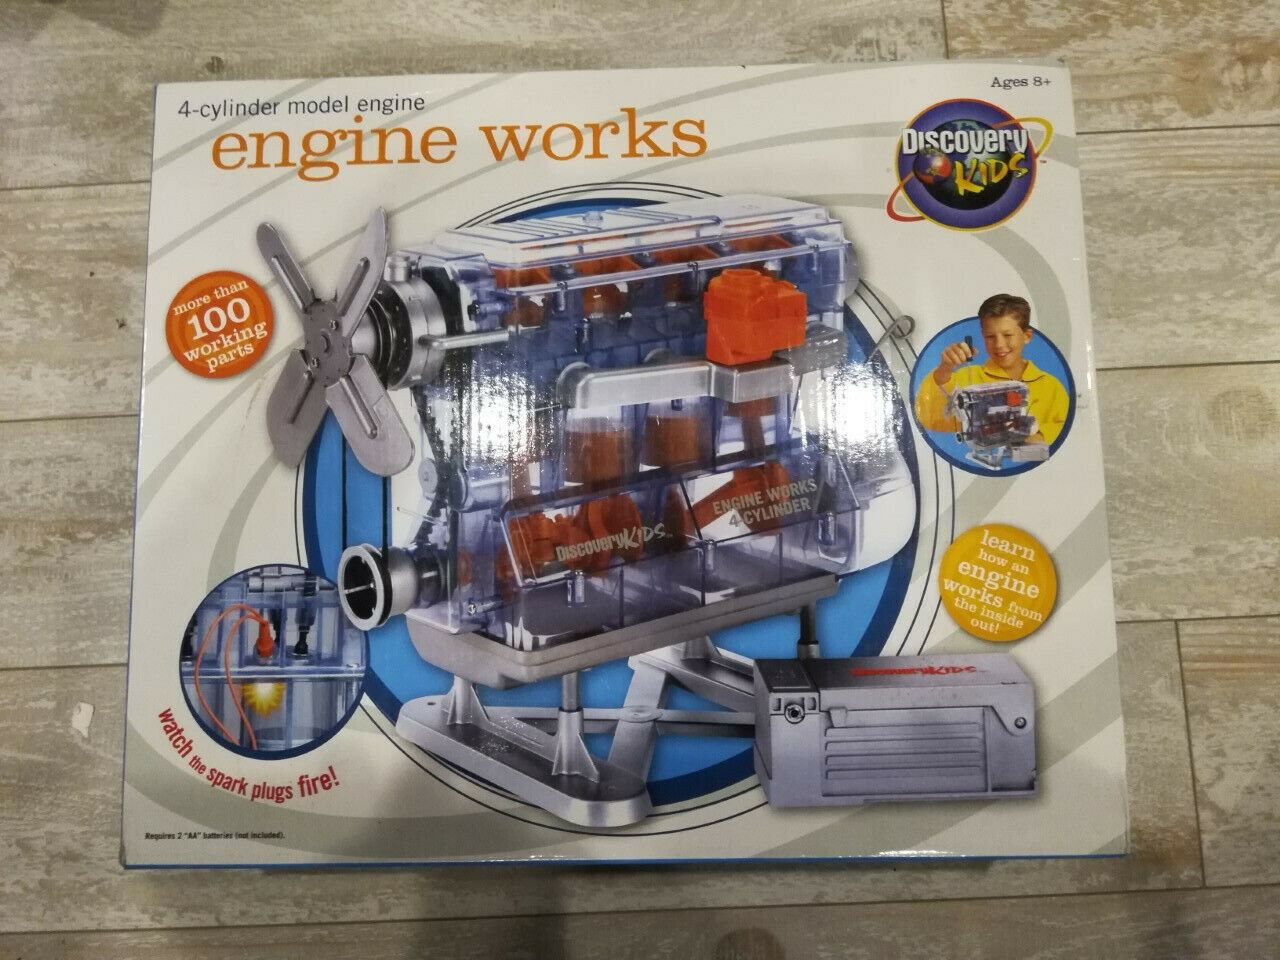 How an engine works for kids?